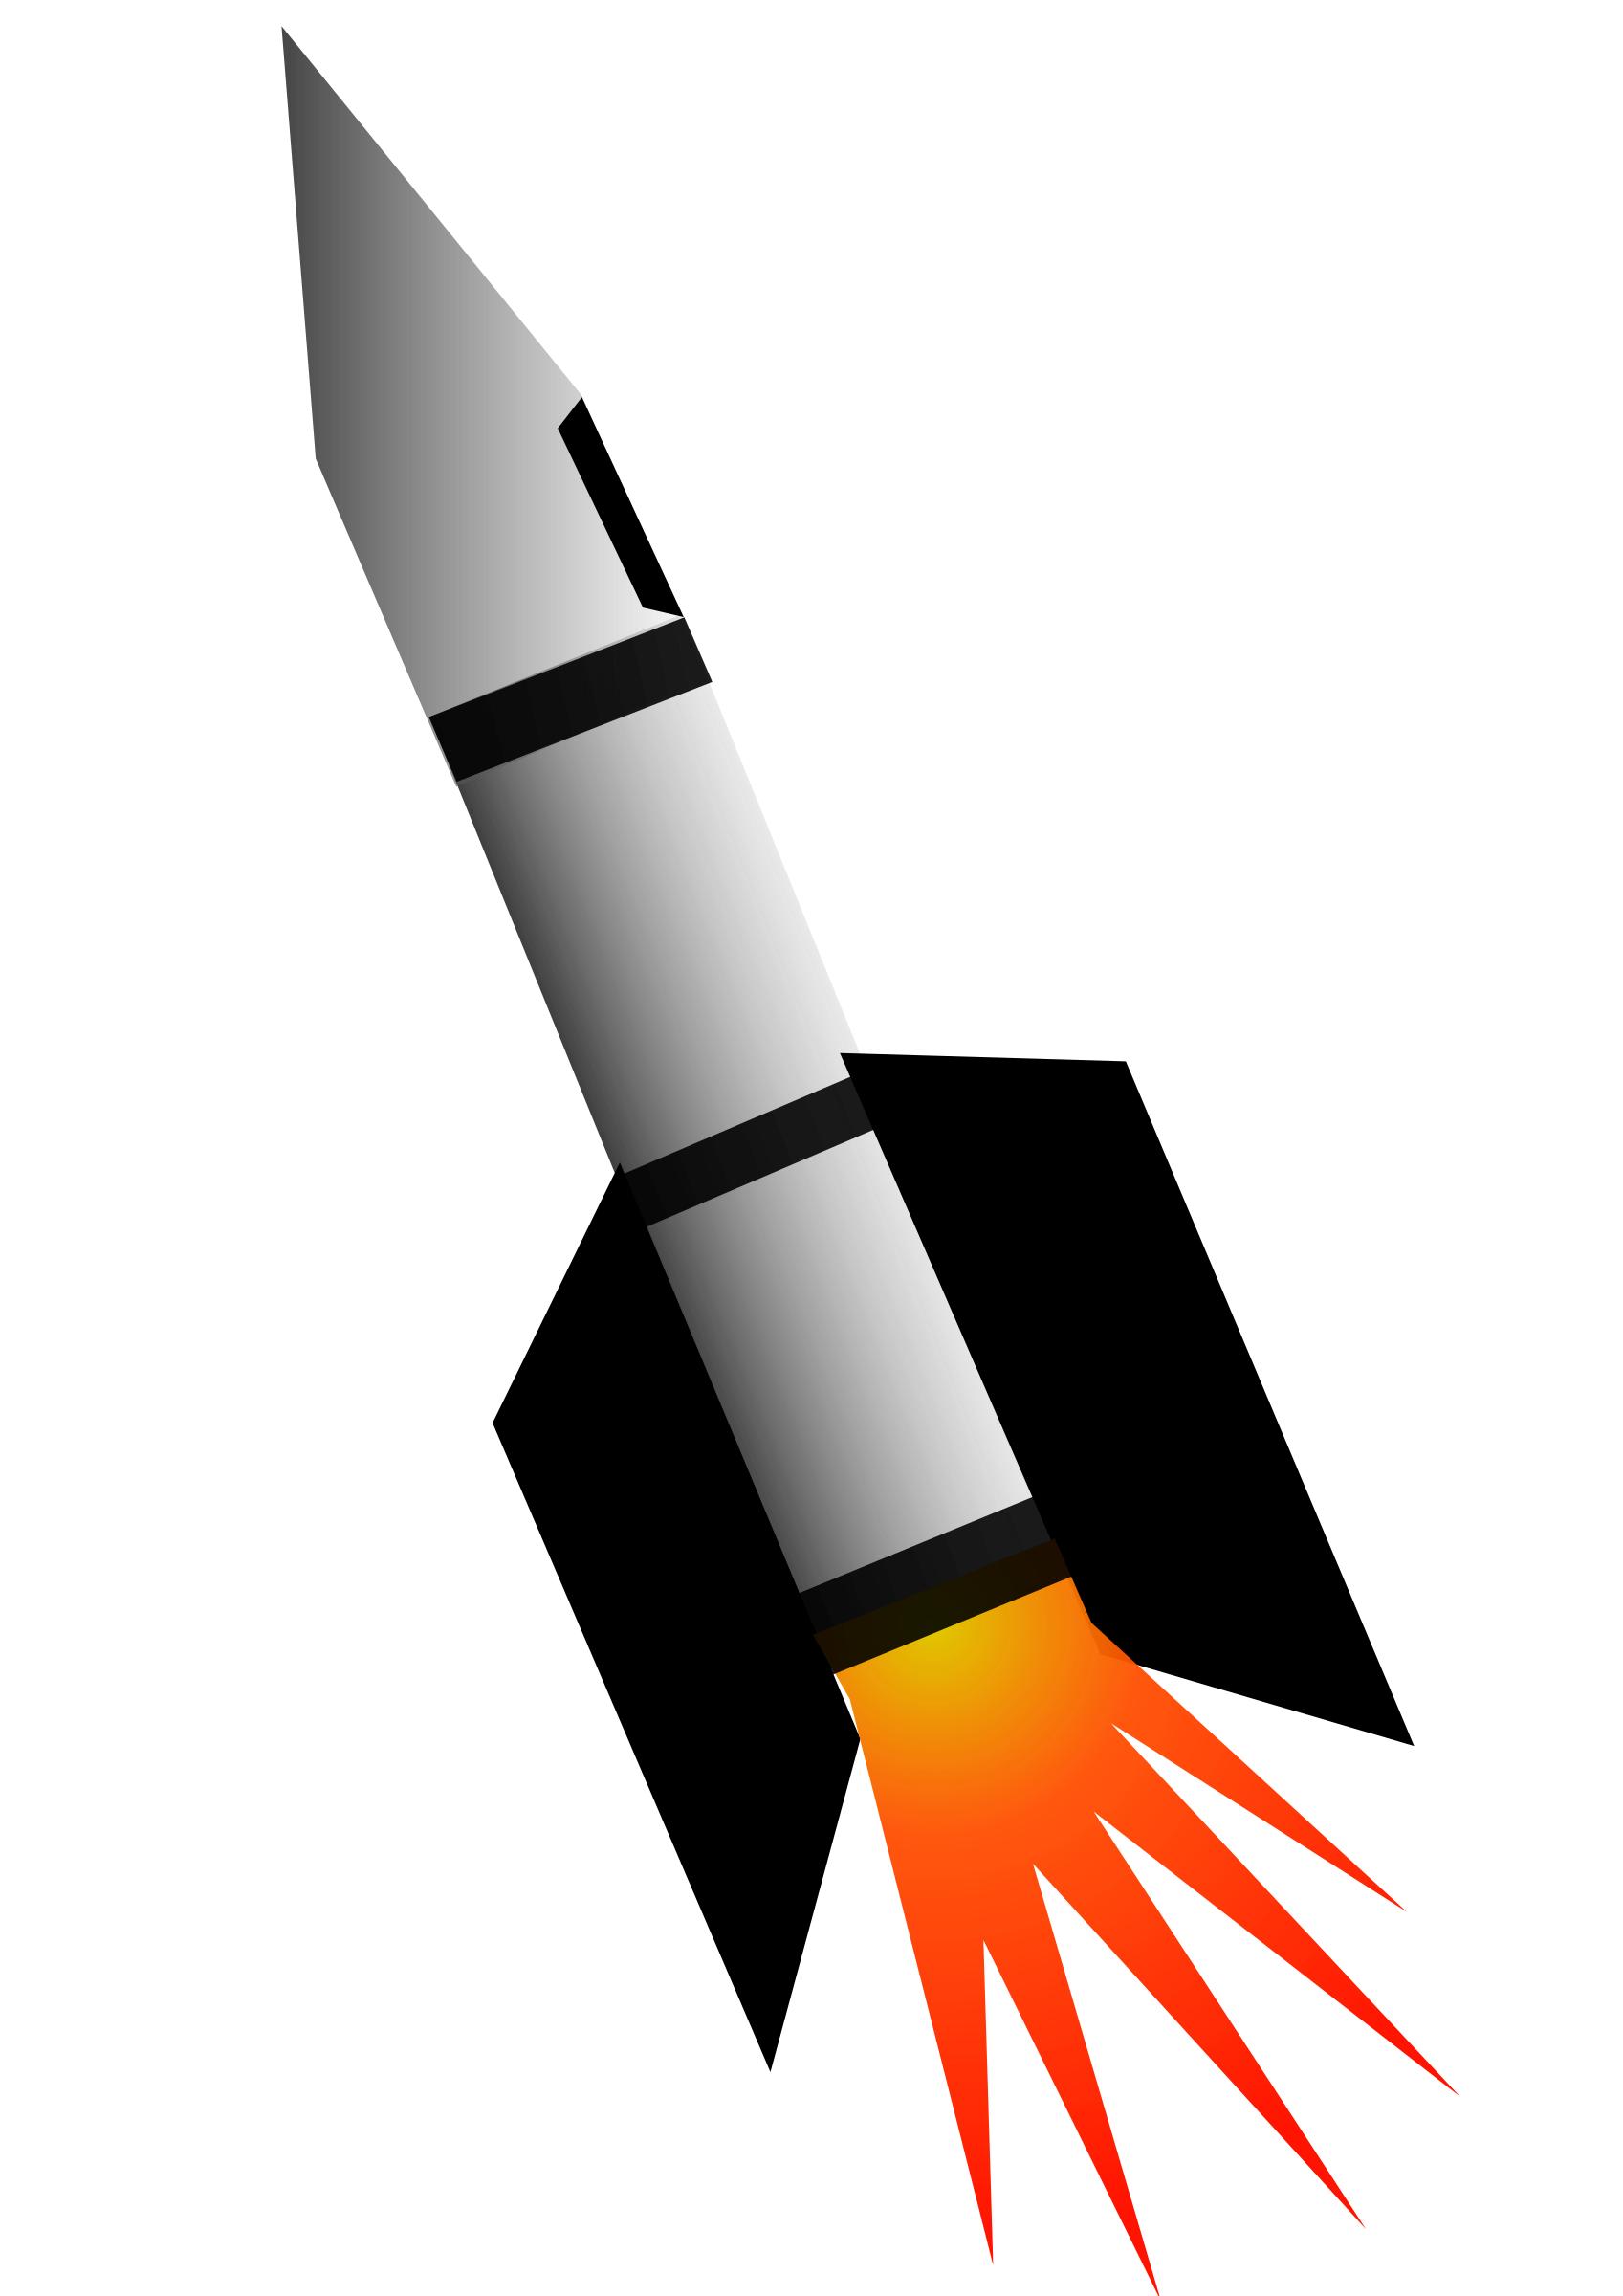 The Rocket png